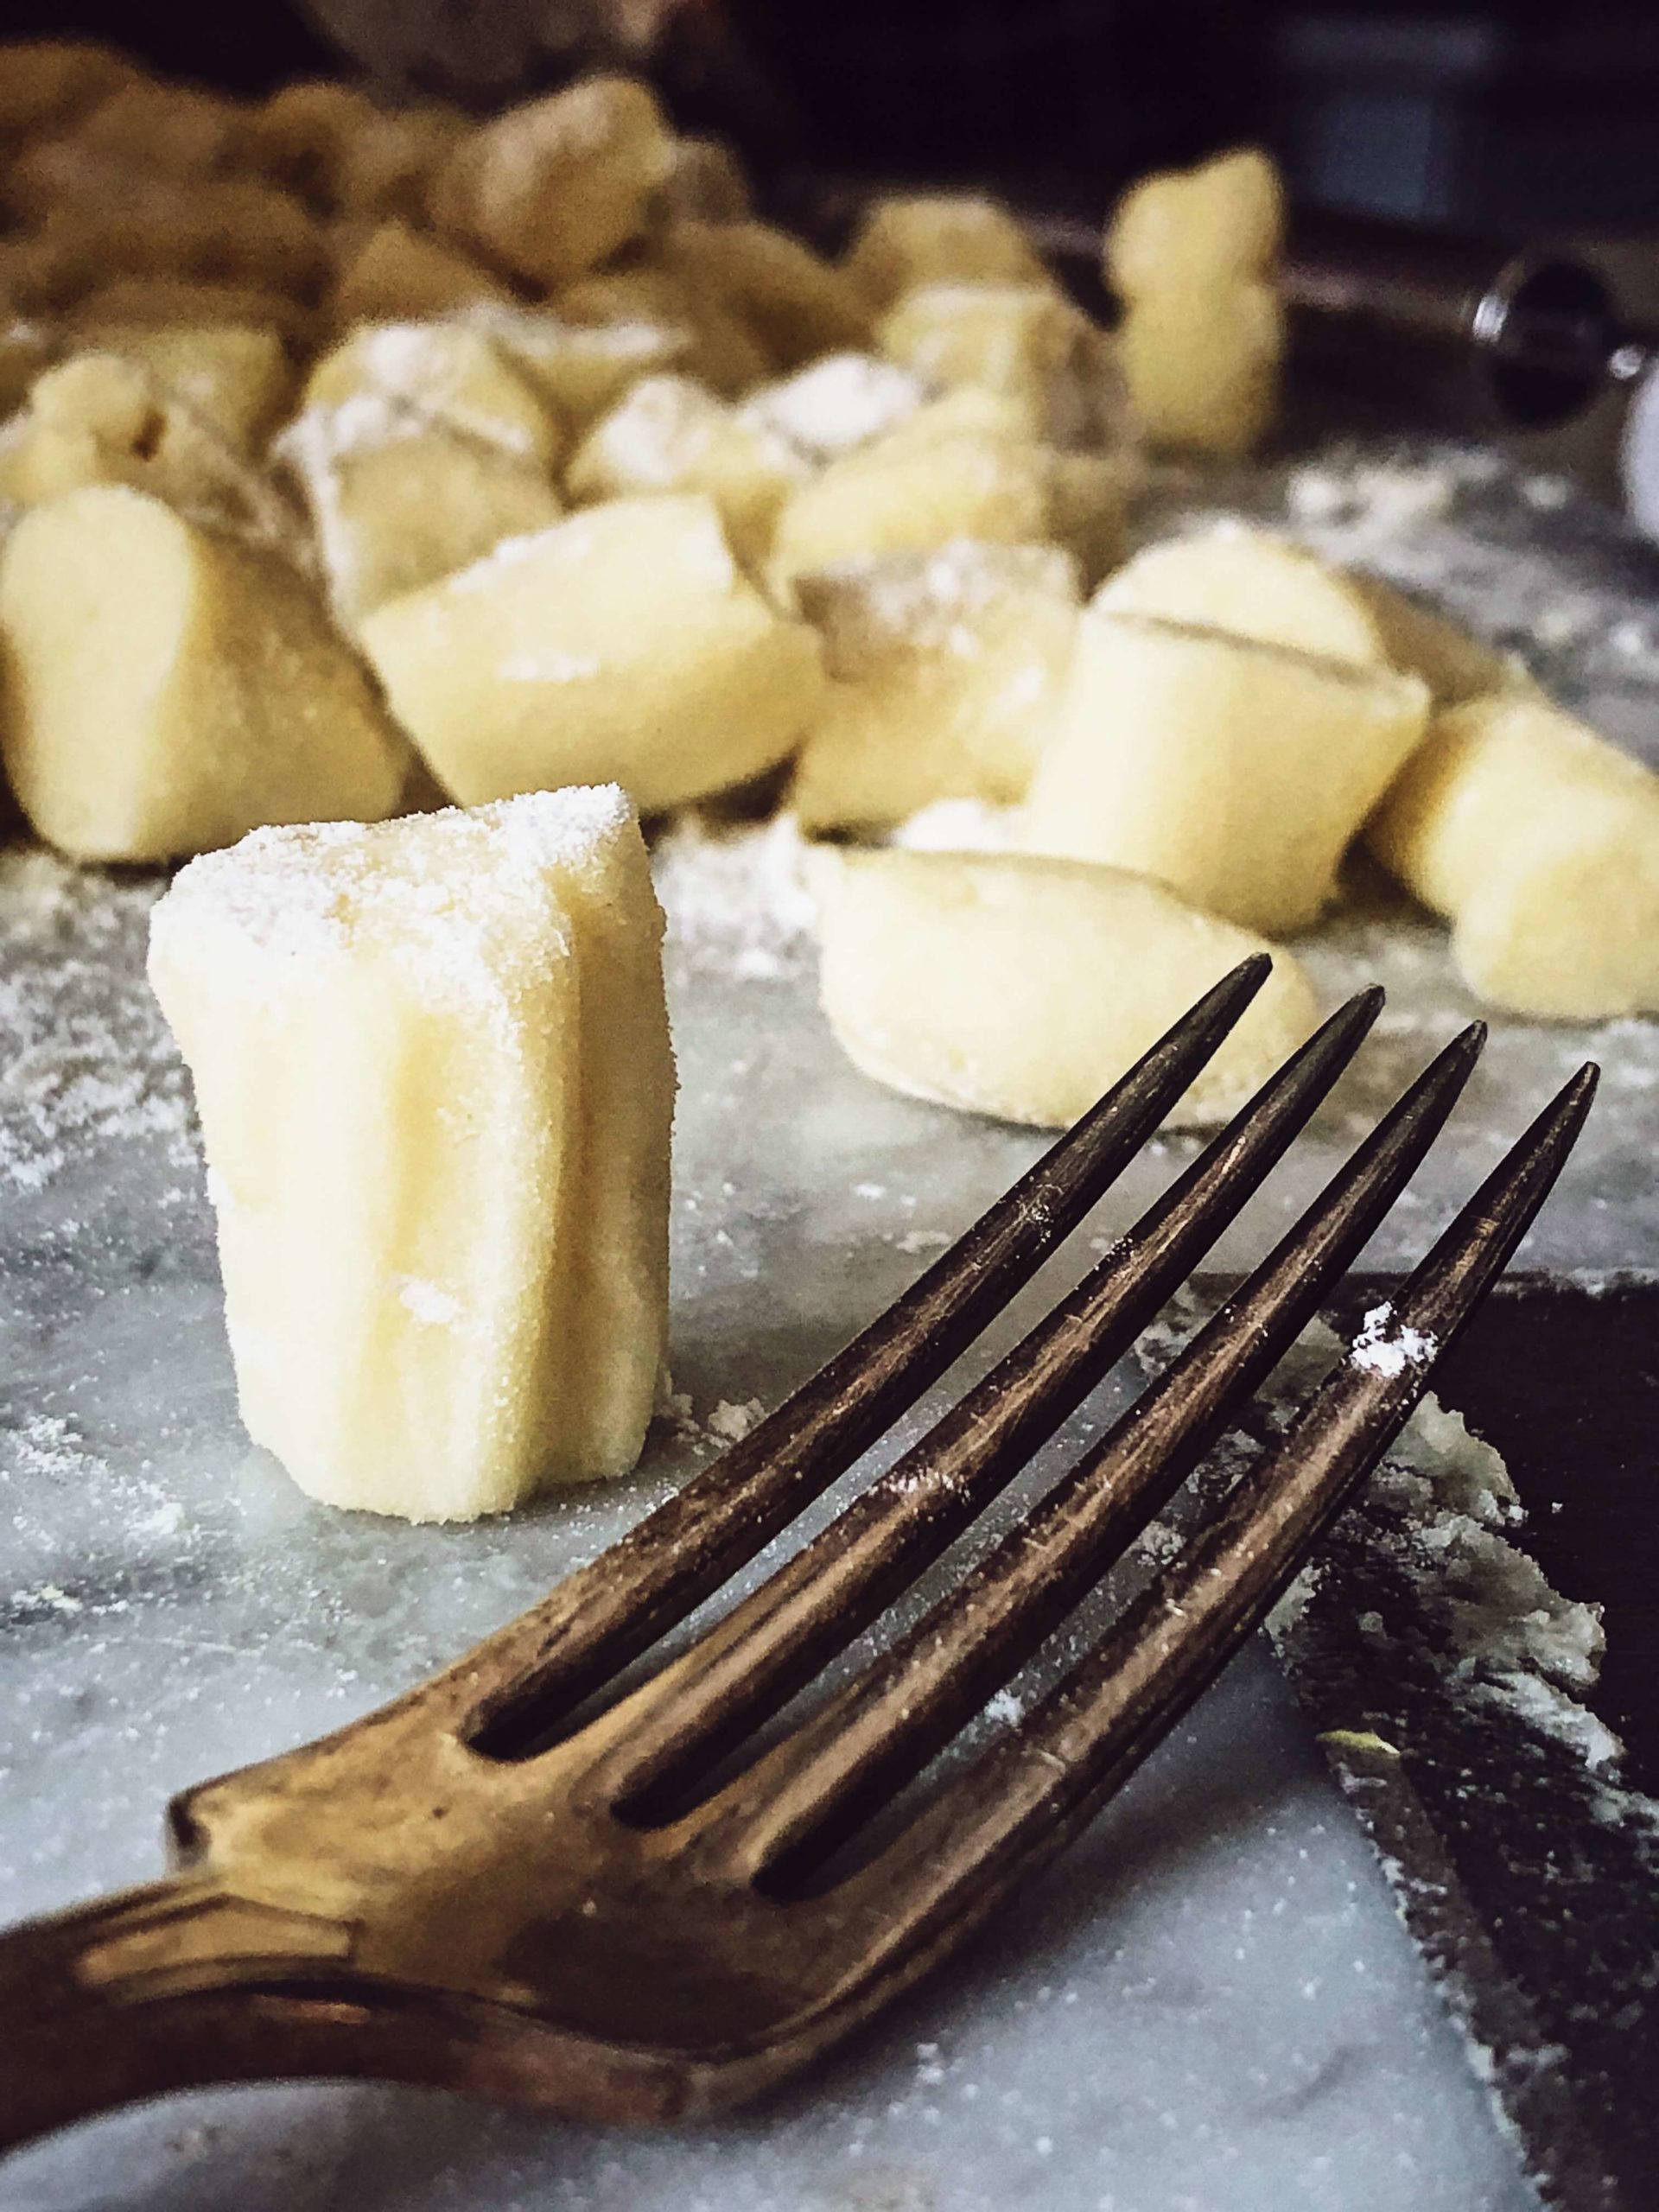 engraving gnocchi with a fork